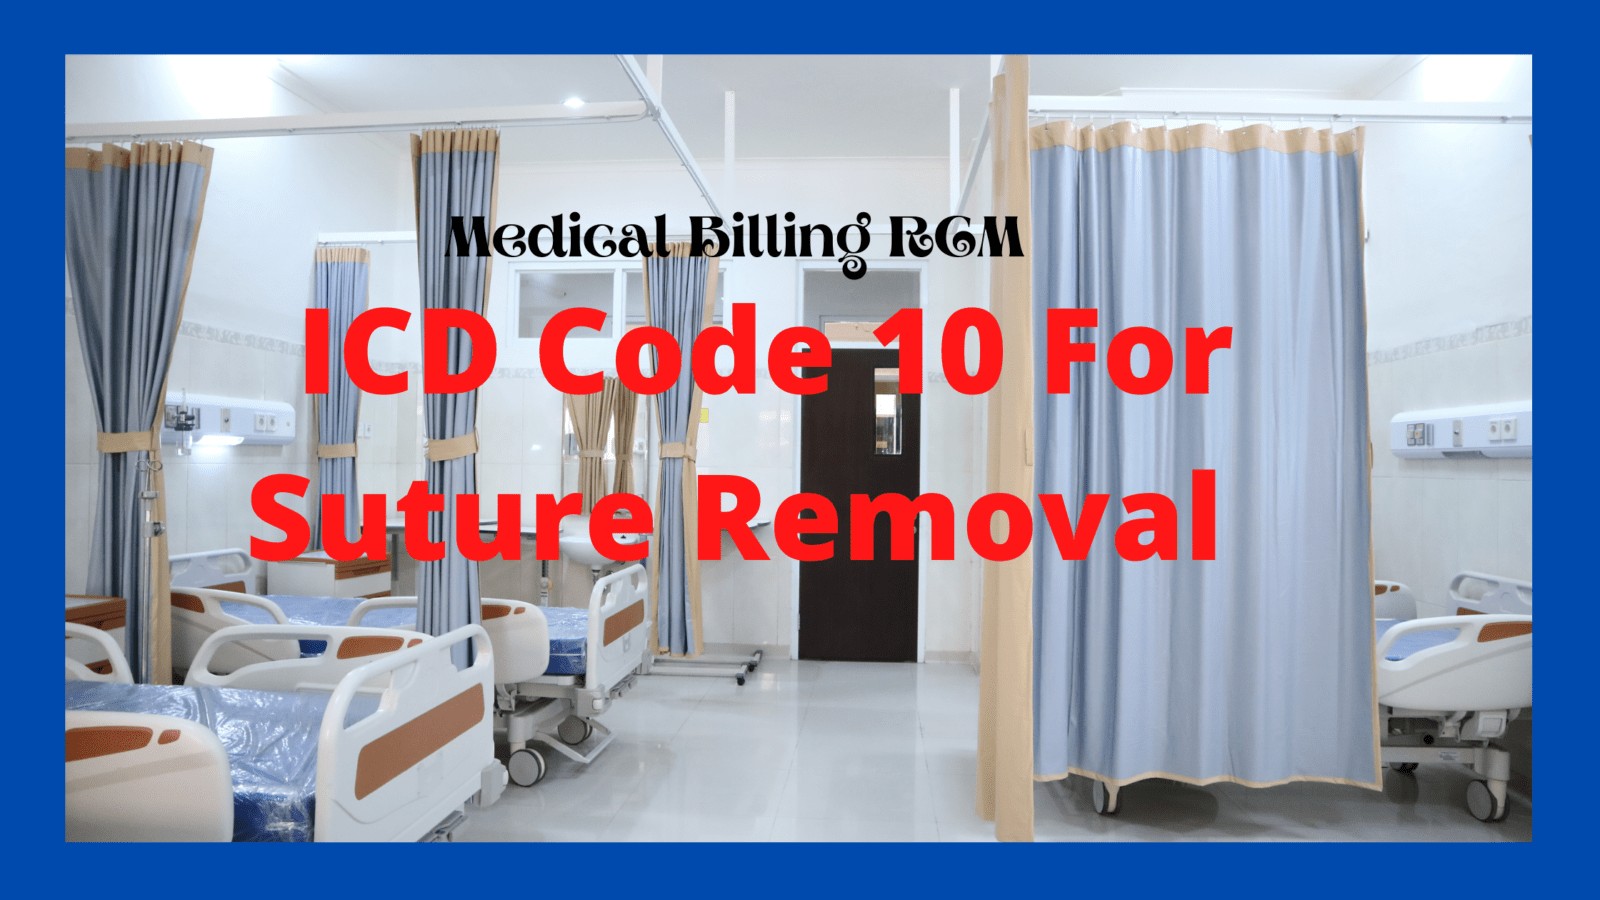 ICD Code 10 For Suture Removal